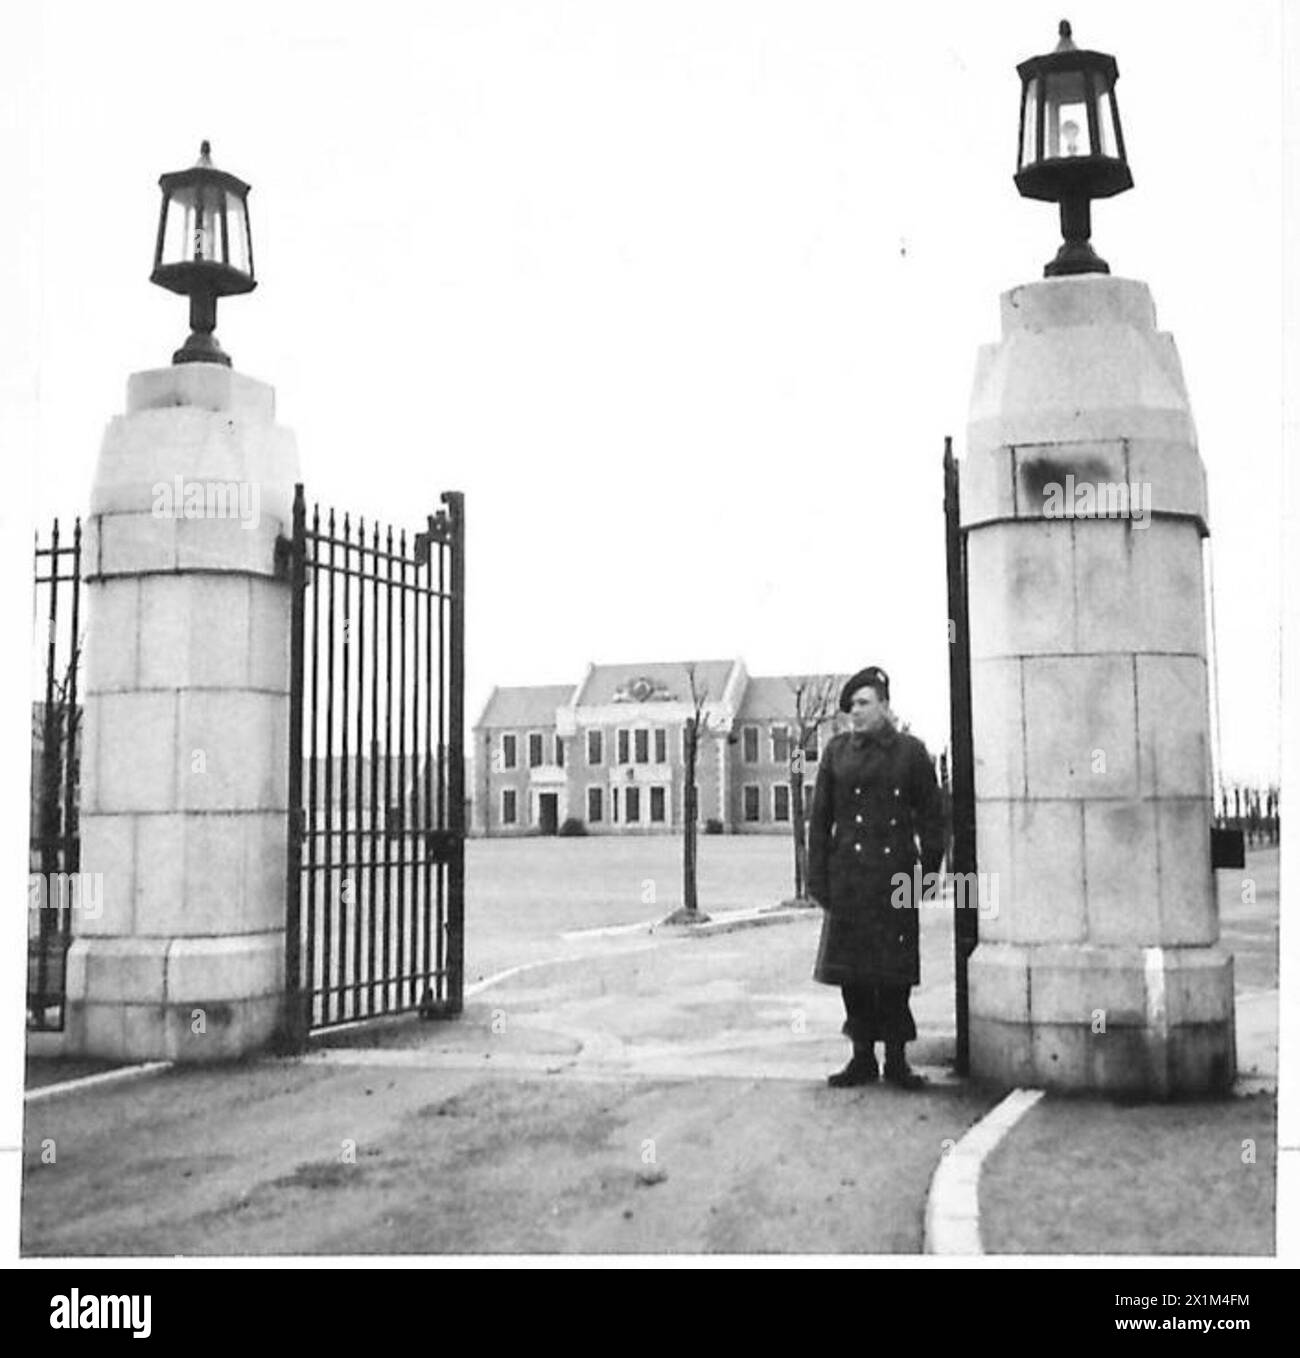 THE GORDON HIGHLANDERS - General view of Depot, showing the main Gate and a Guard, British Army Stock Photo